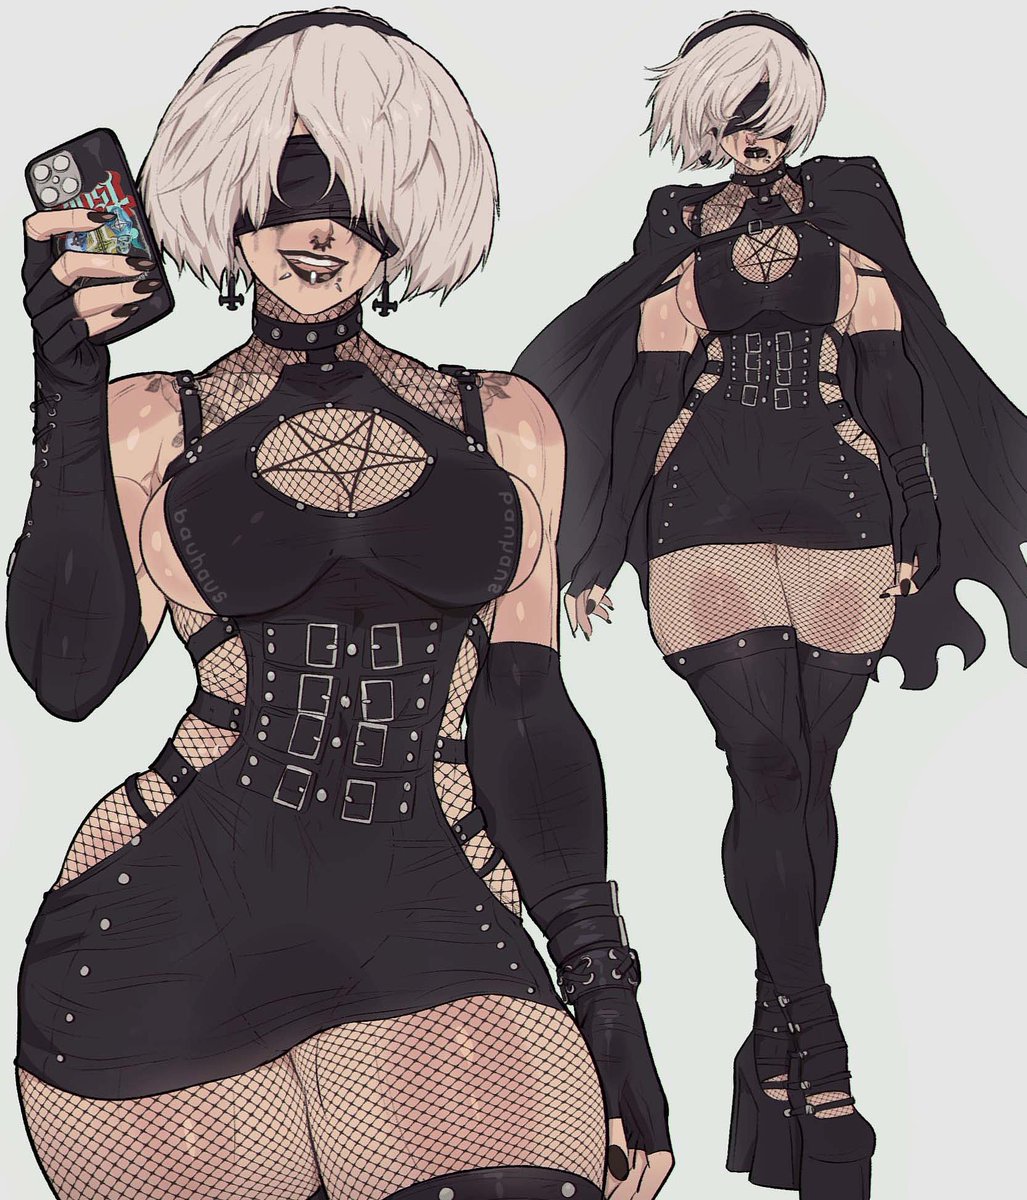 wanted to draw goth 2B again